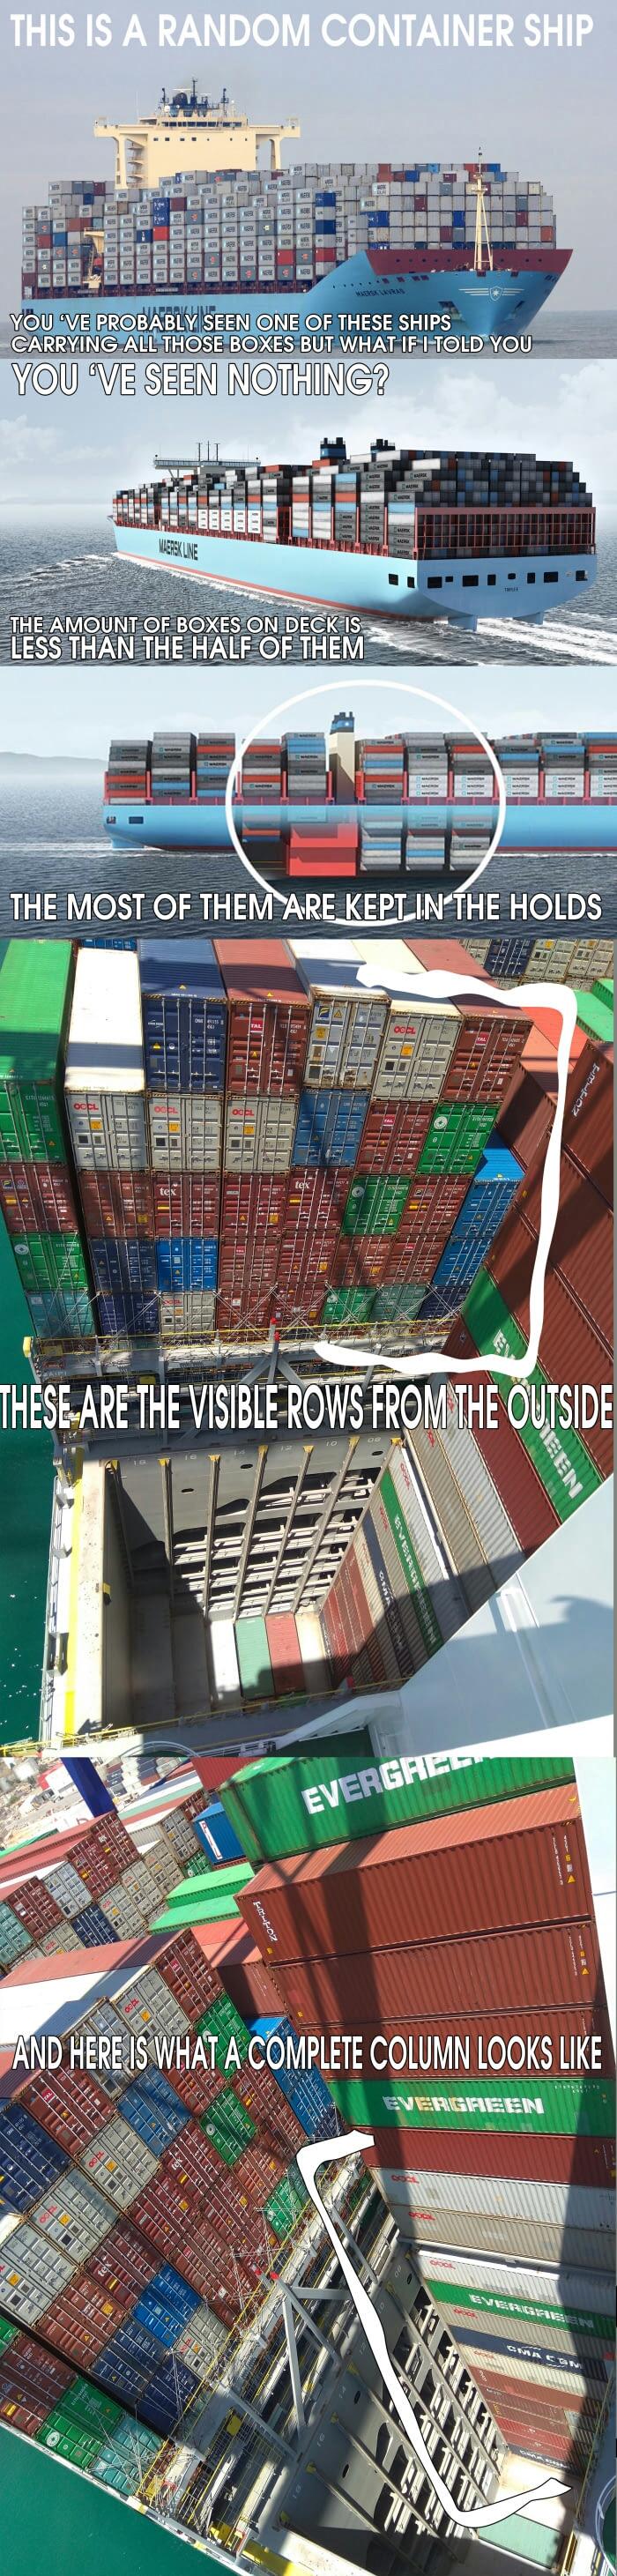 An ordinary container ship is more than as it looks like